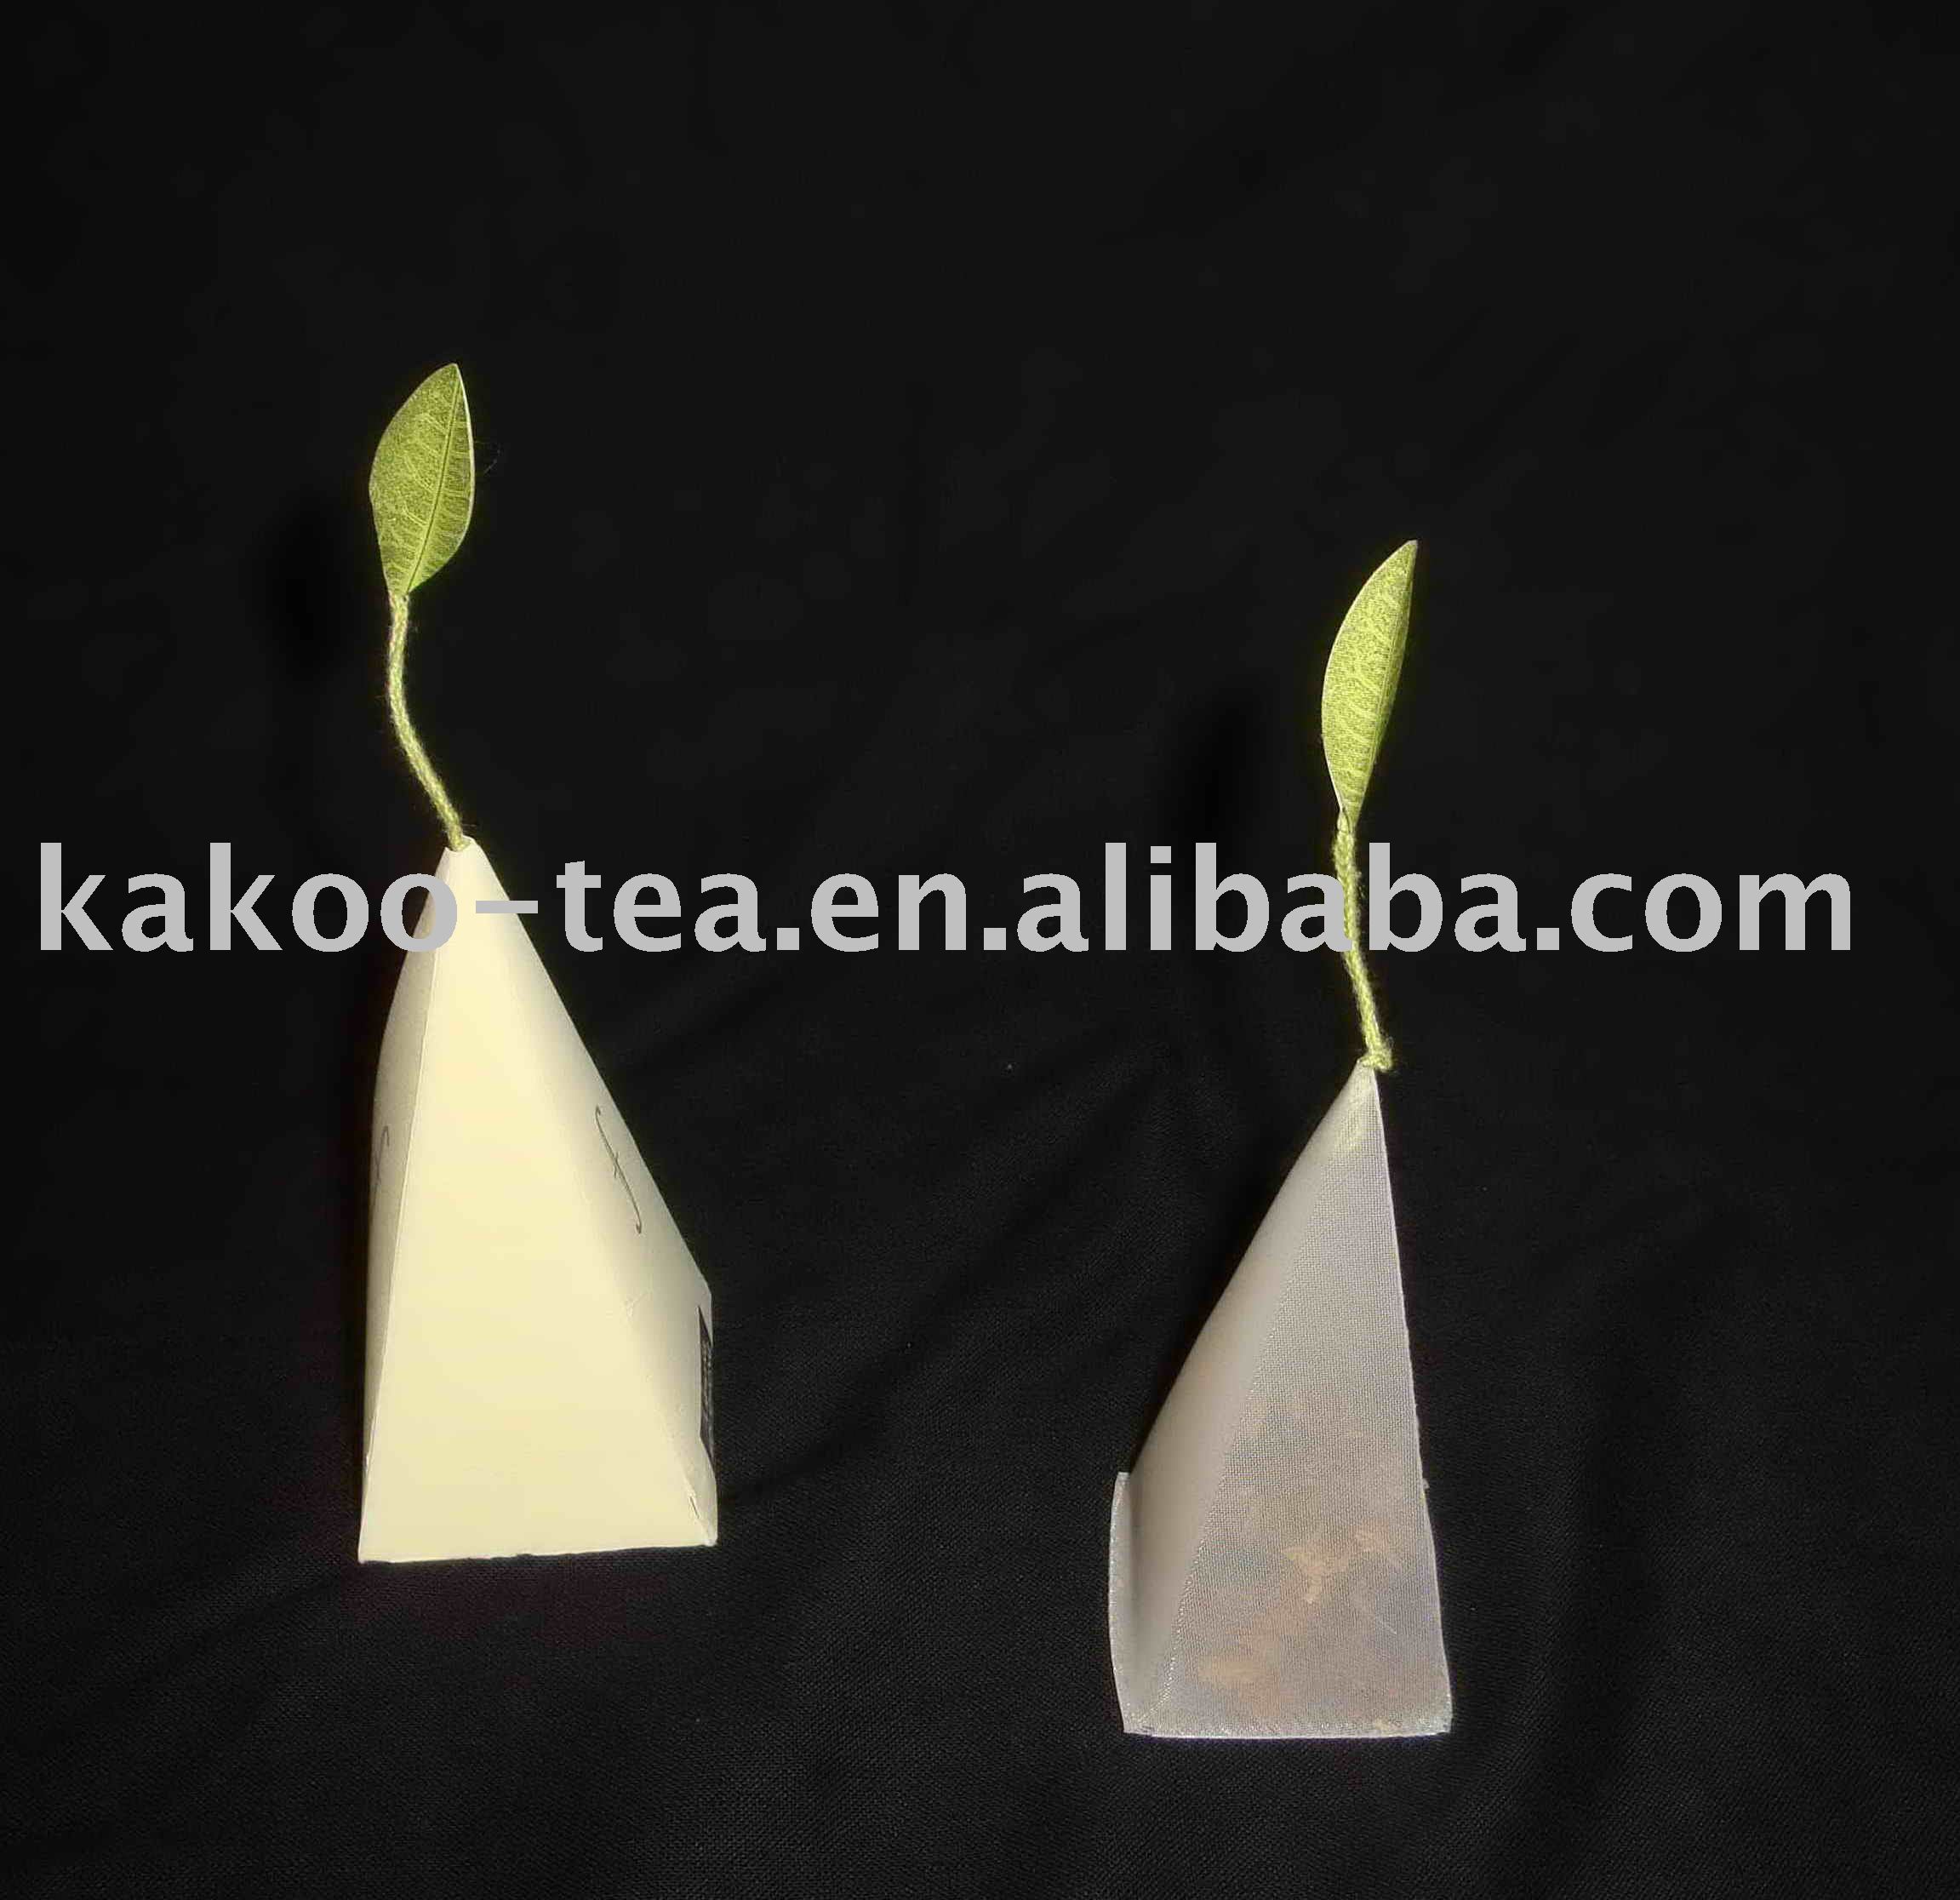 Sell Pyramid tea bag with fixed shapeChina price supplier  21food